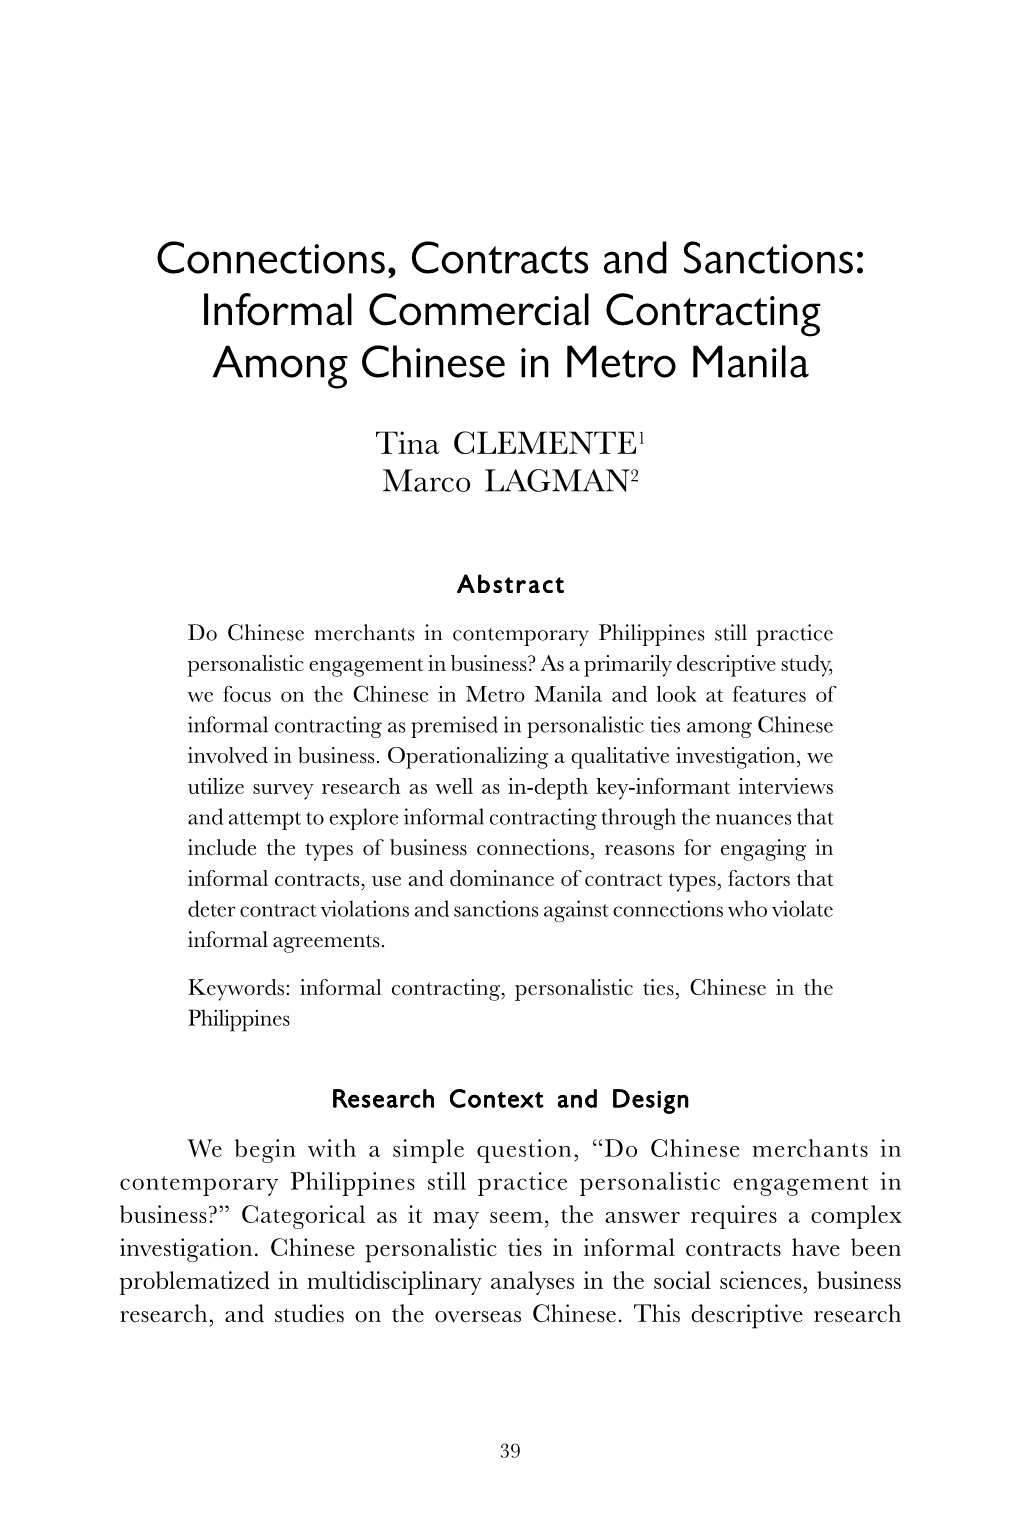 Informal Commercial Contracting Among Chinese in Metro Manila